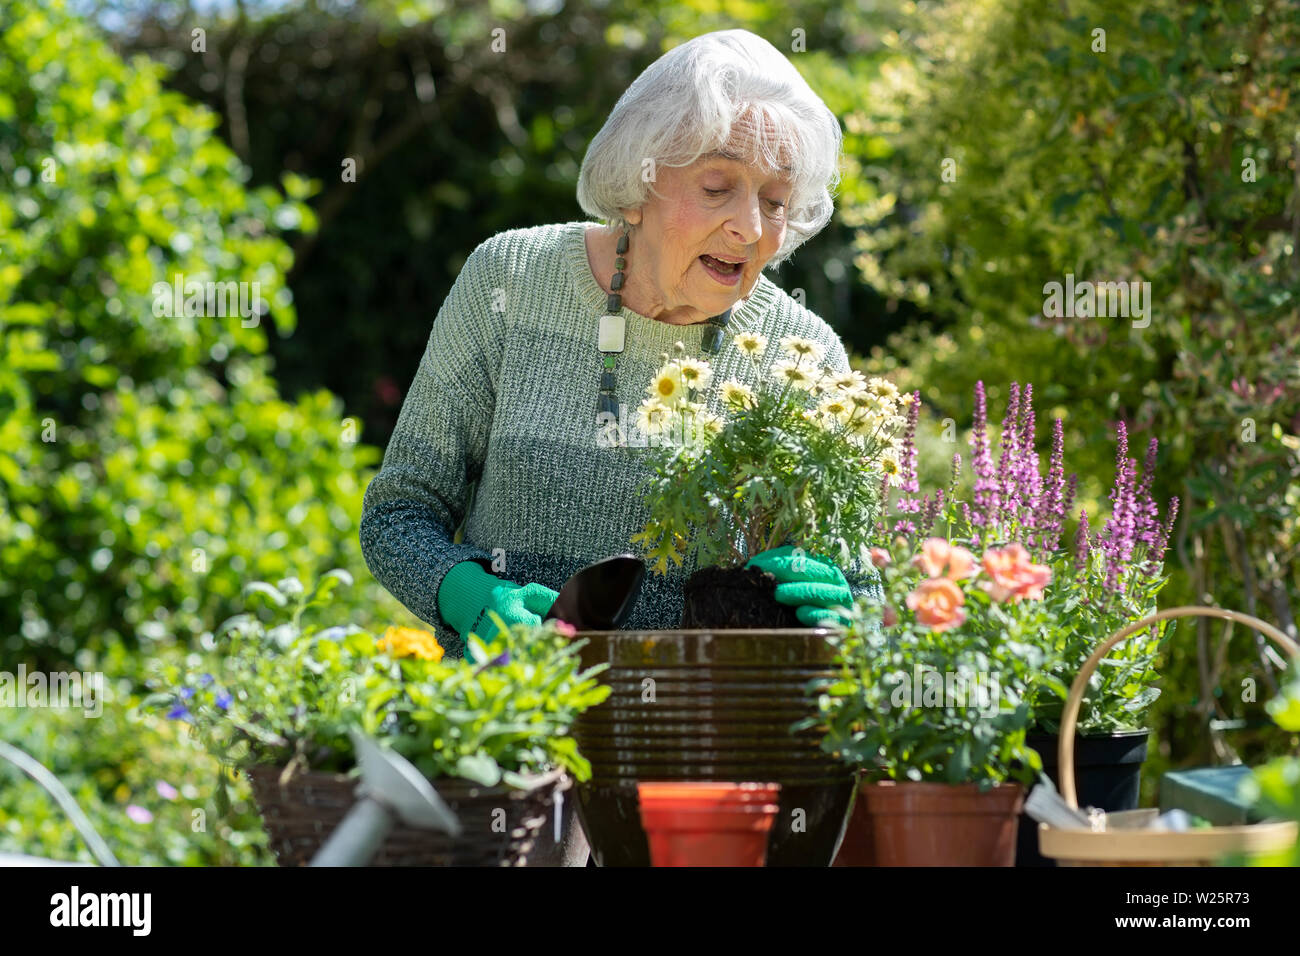 Senior Woman Potting Plant In Garden At Home Stock Photo